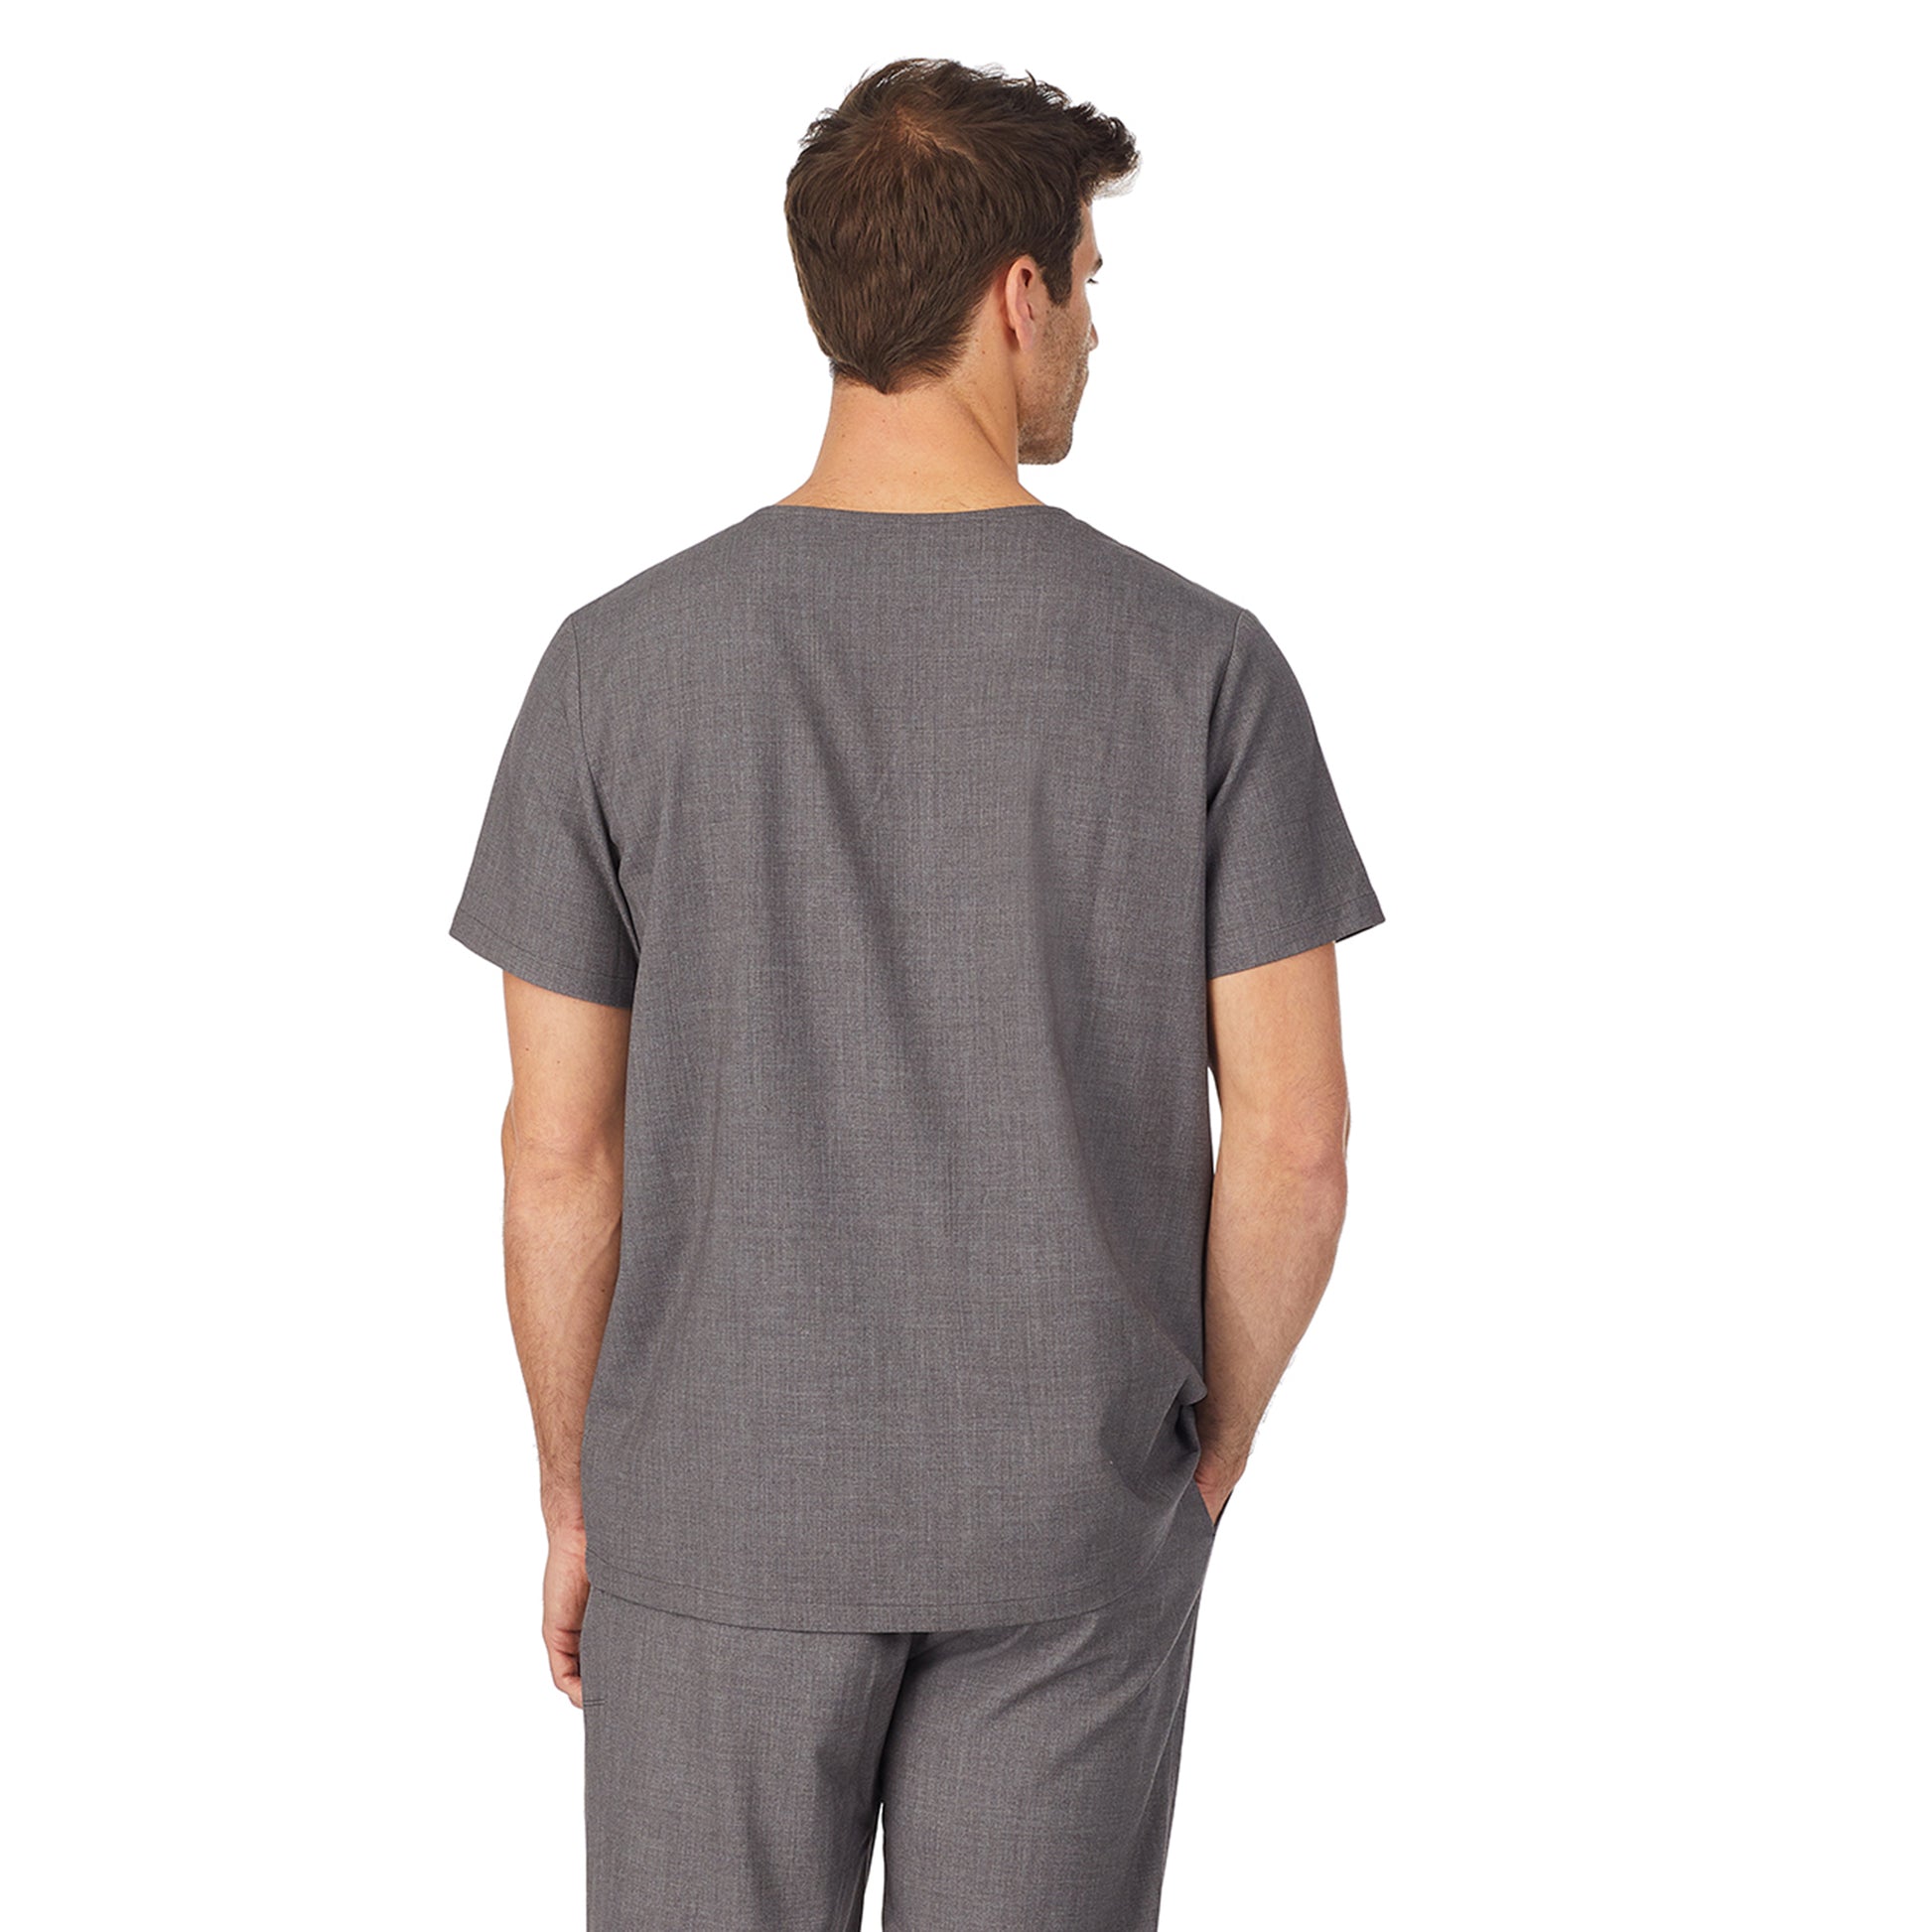 Charcoal Heather;Model is wearing size M. He is 6'2", Waist 32", Inseam 32".@A man wearing charcoal heather mens scrub v-neck top with chest pocket.